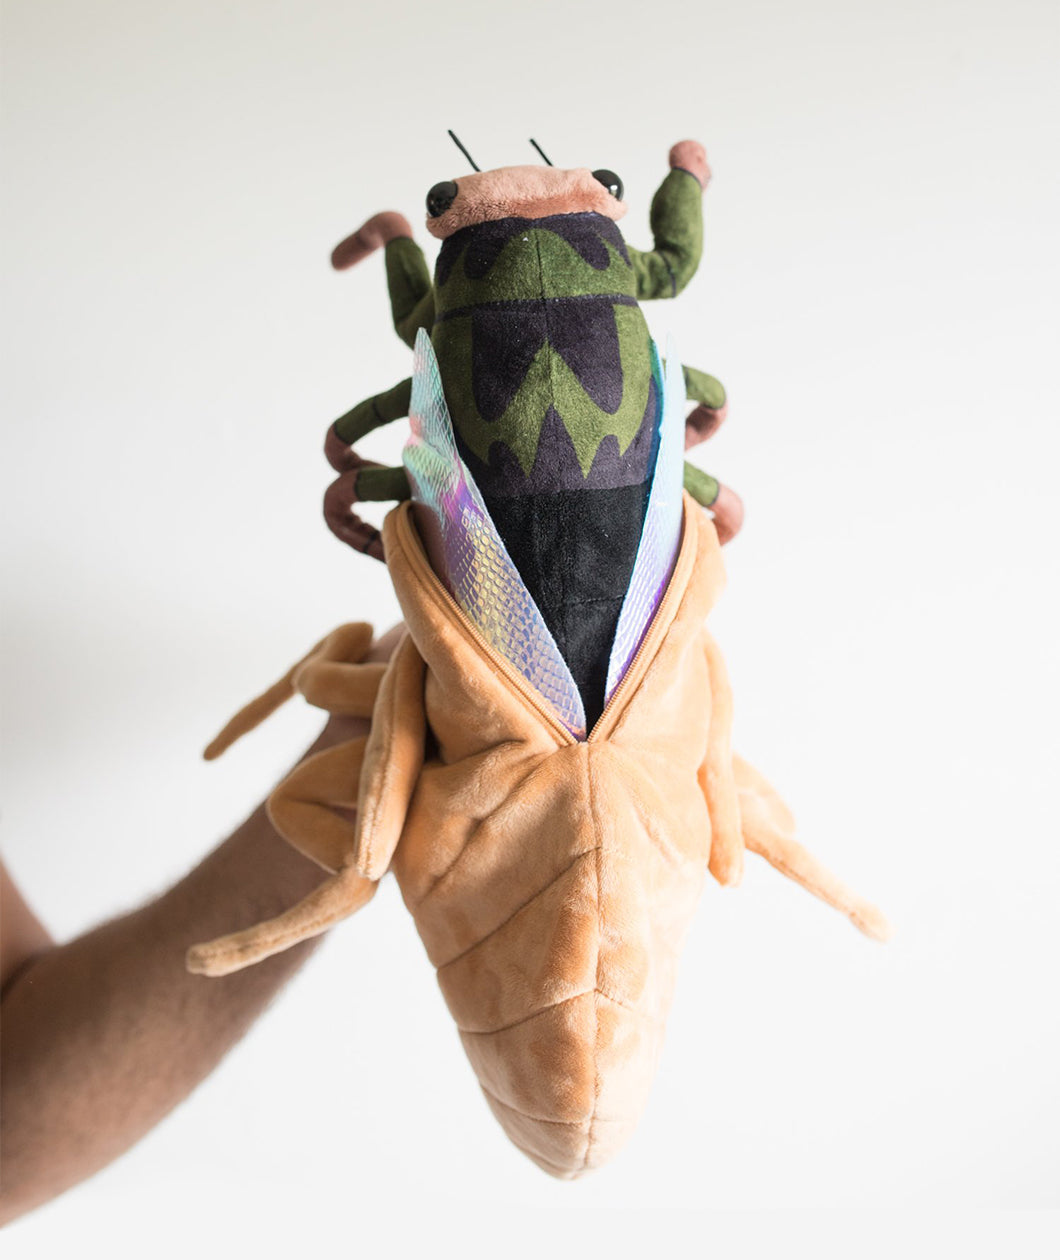 A green, black, and grey cicada held aloft by Tyler Thrasher. The cicada has iridescent wings and is halfway emerged from its tan plush shell, which is unzipped.